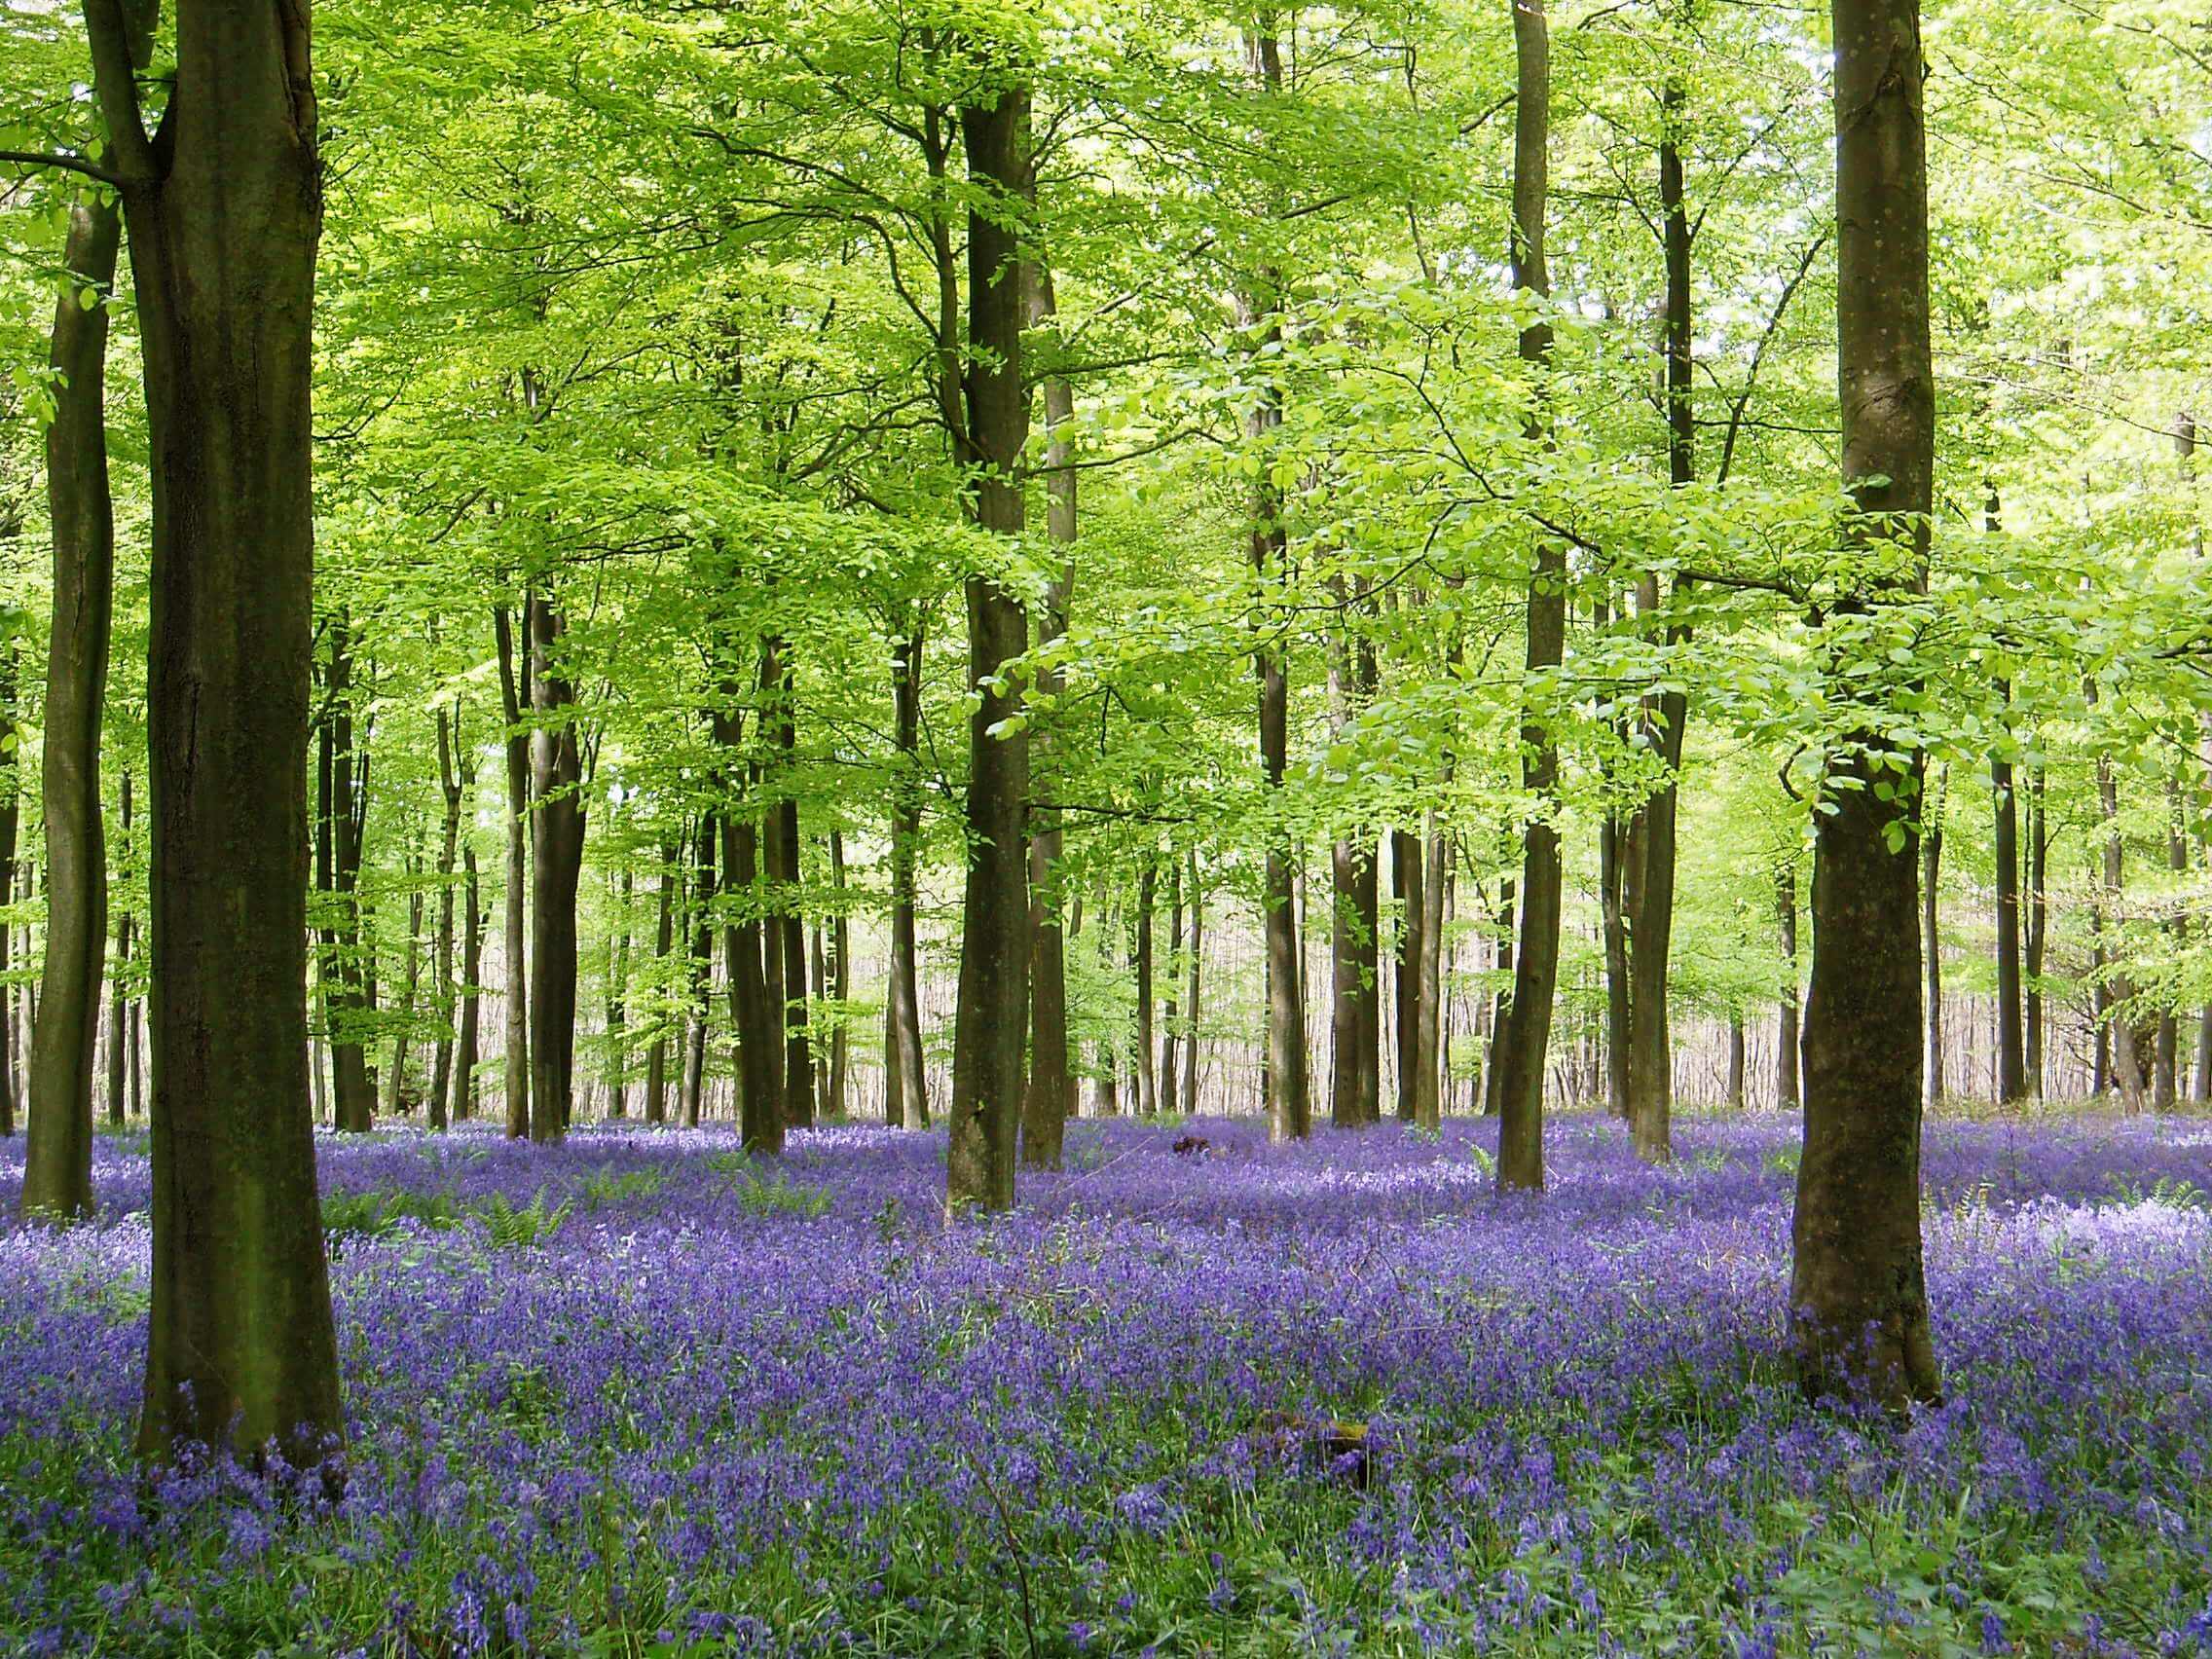 Bluebells and tall trees in King's Wood. Trees have light green leaves.